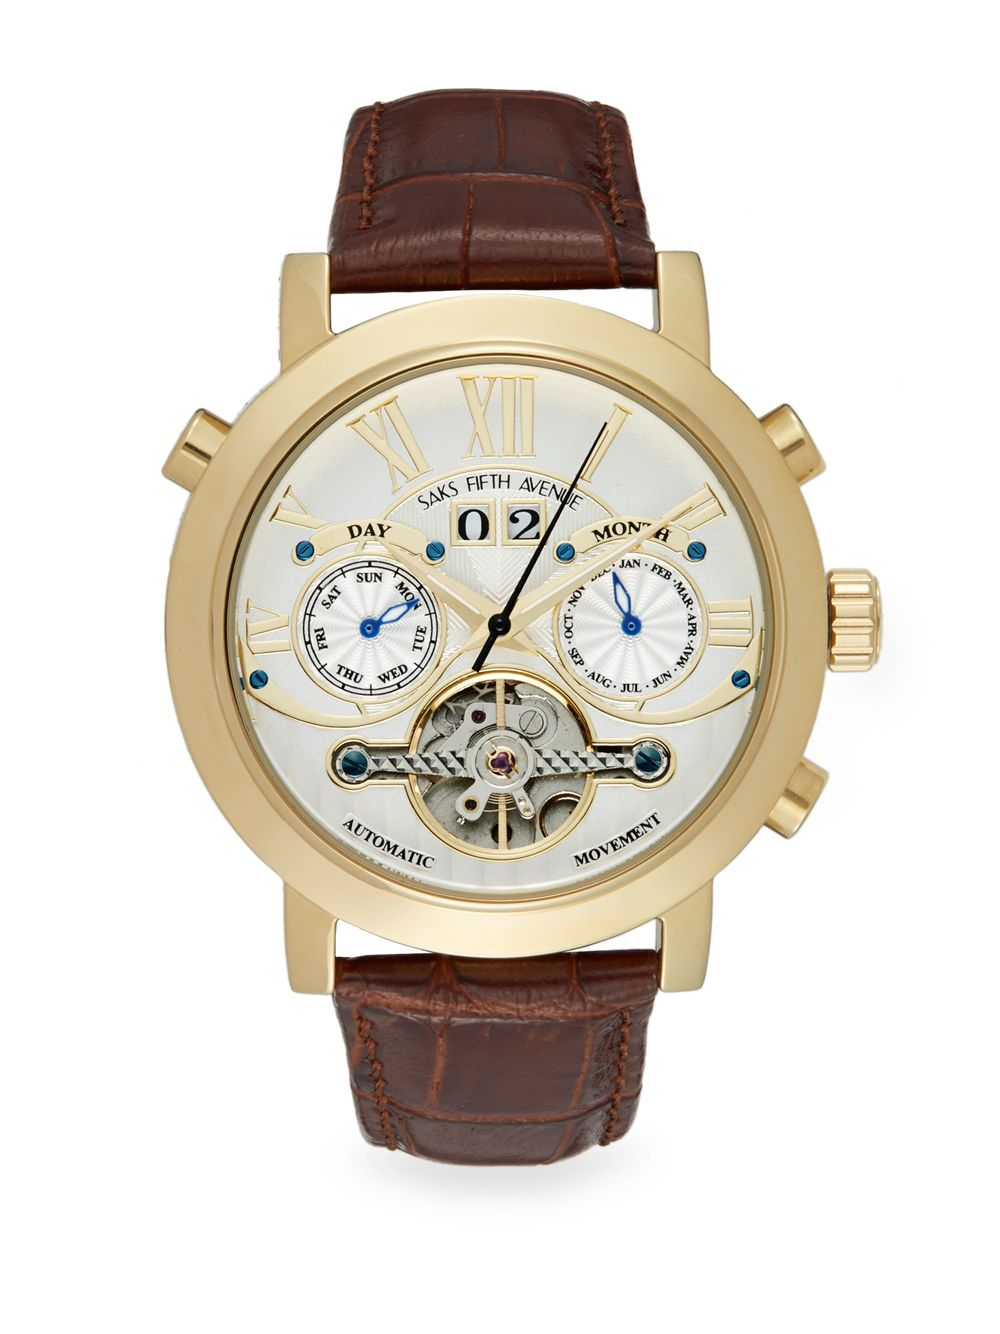 Saks Off Fifth Mens Watches Shop - www.edoc.com.vn 1694719050